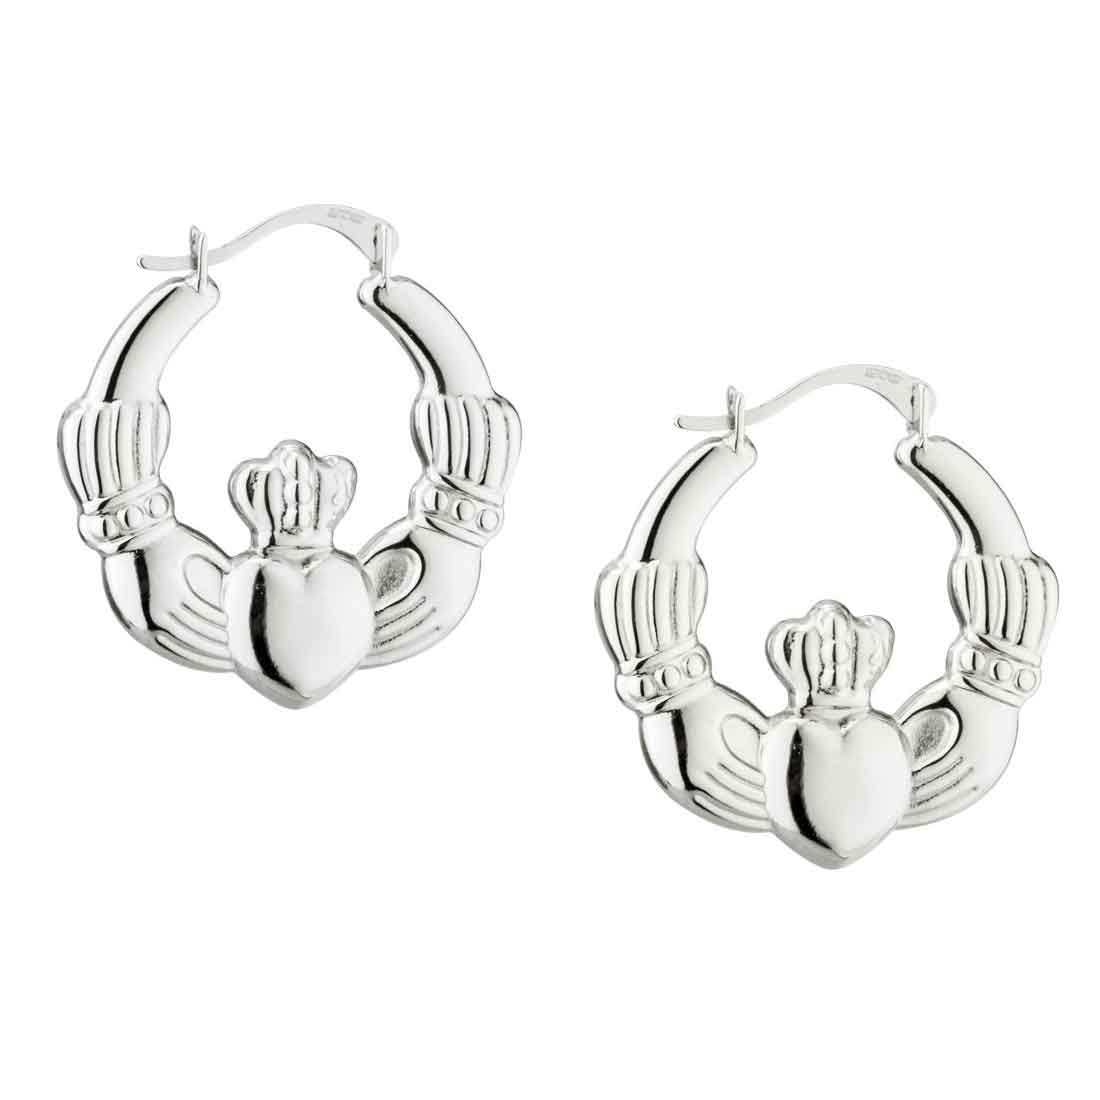 Product image for Small Claddagh Hoop Earrings